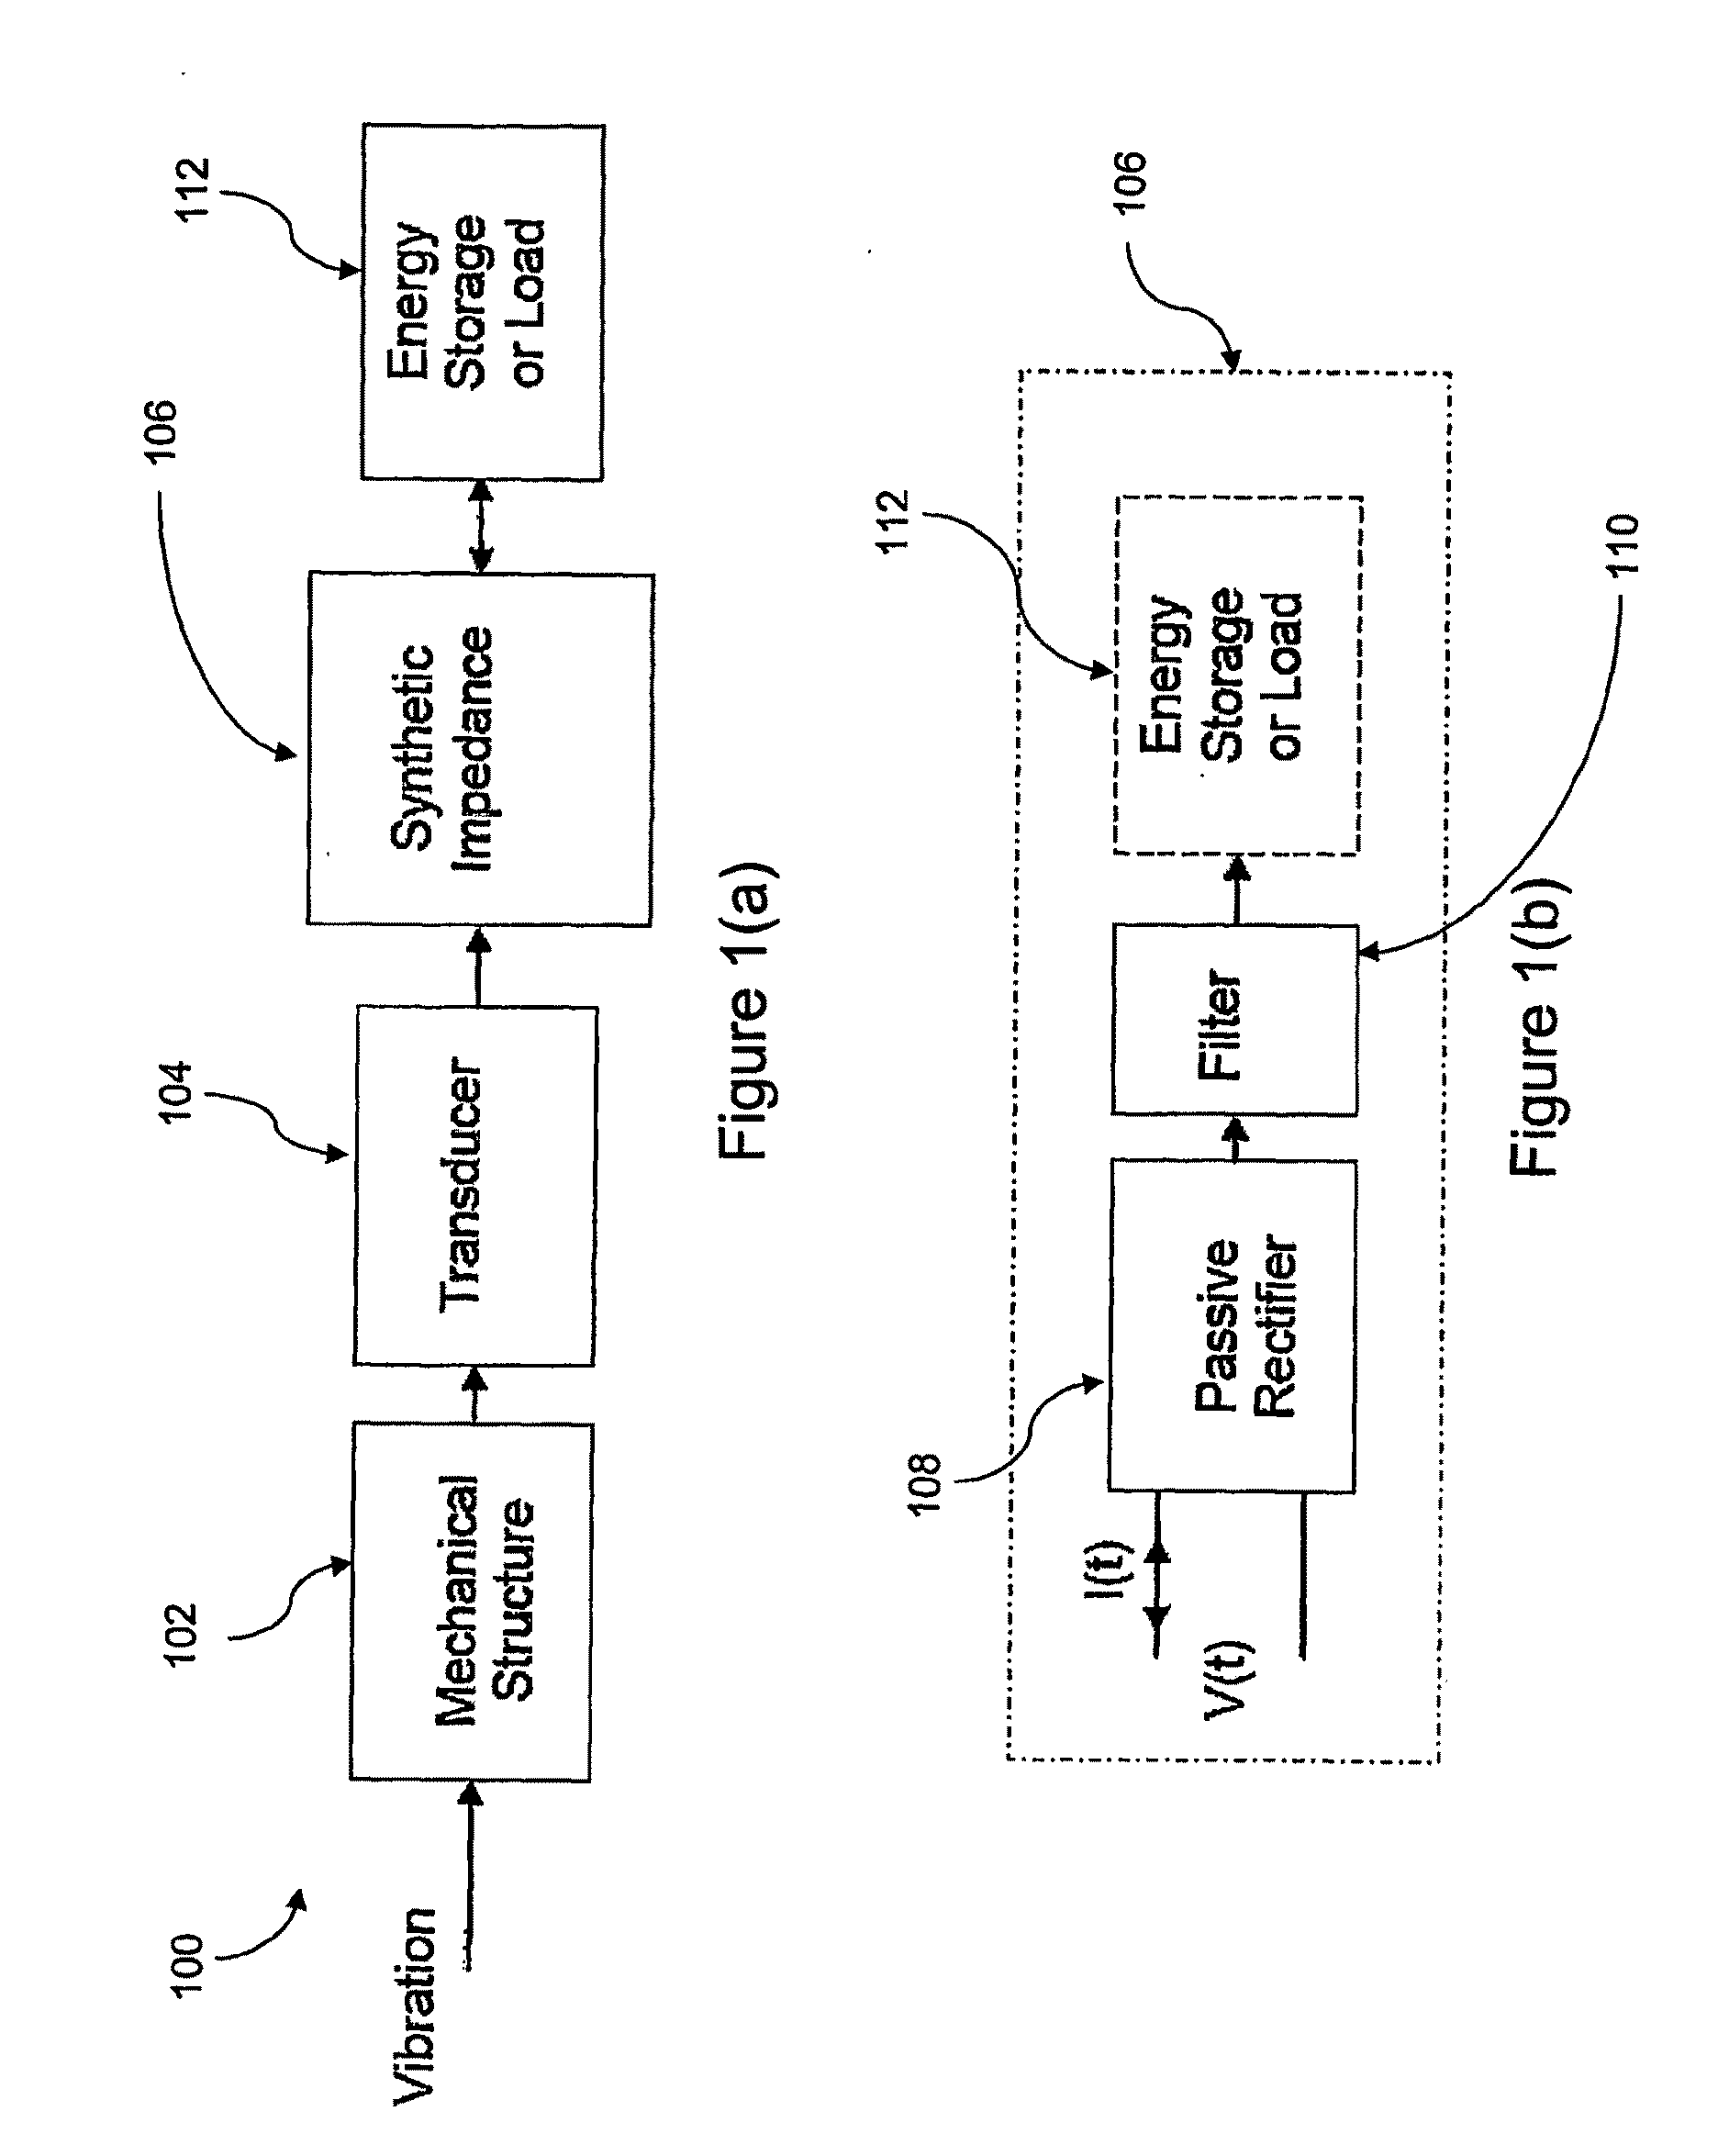 Method and Apparatus for Harvesting Energy from Mechanical Vibrations